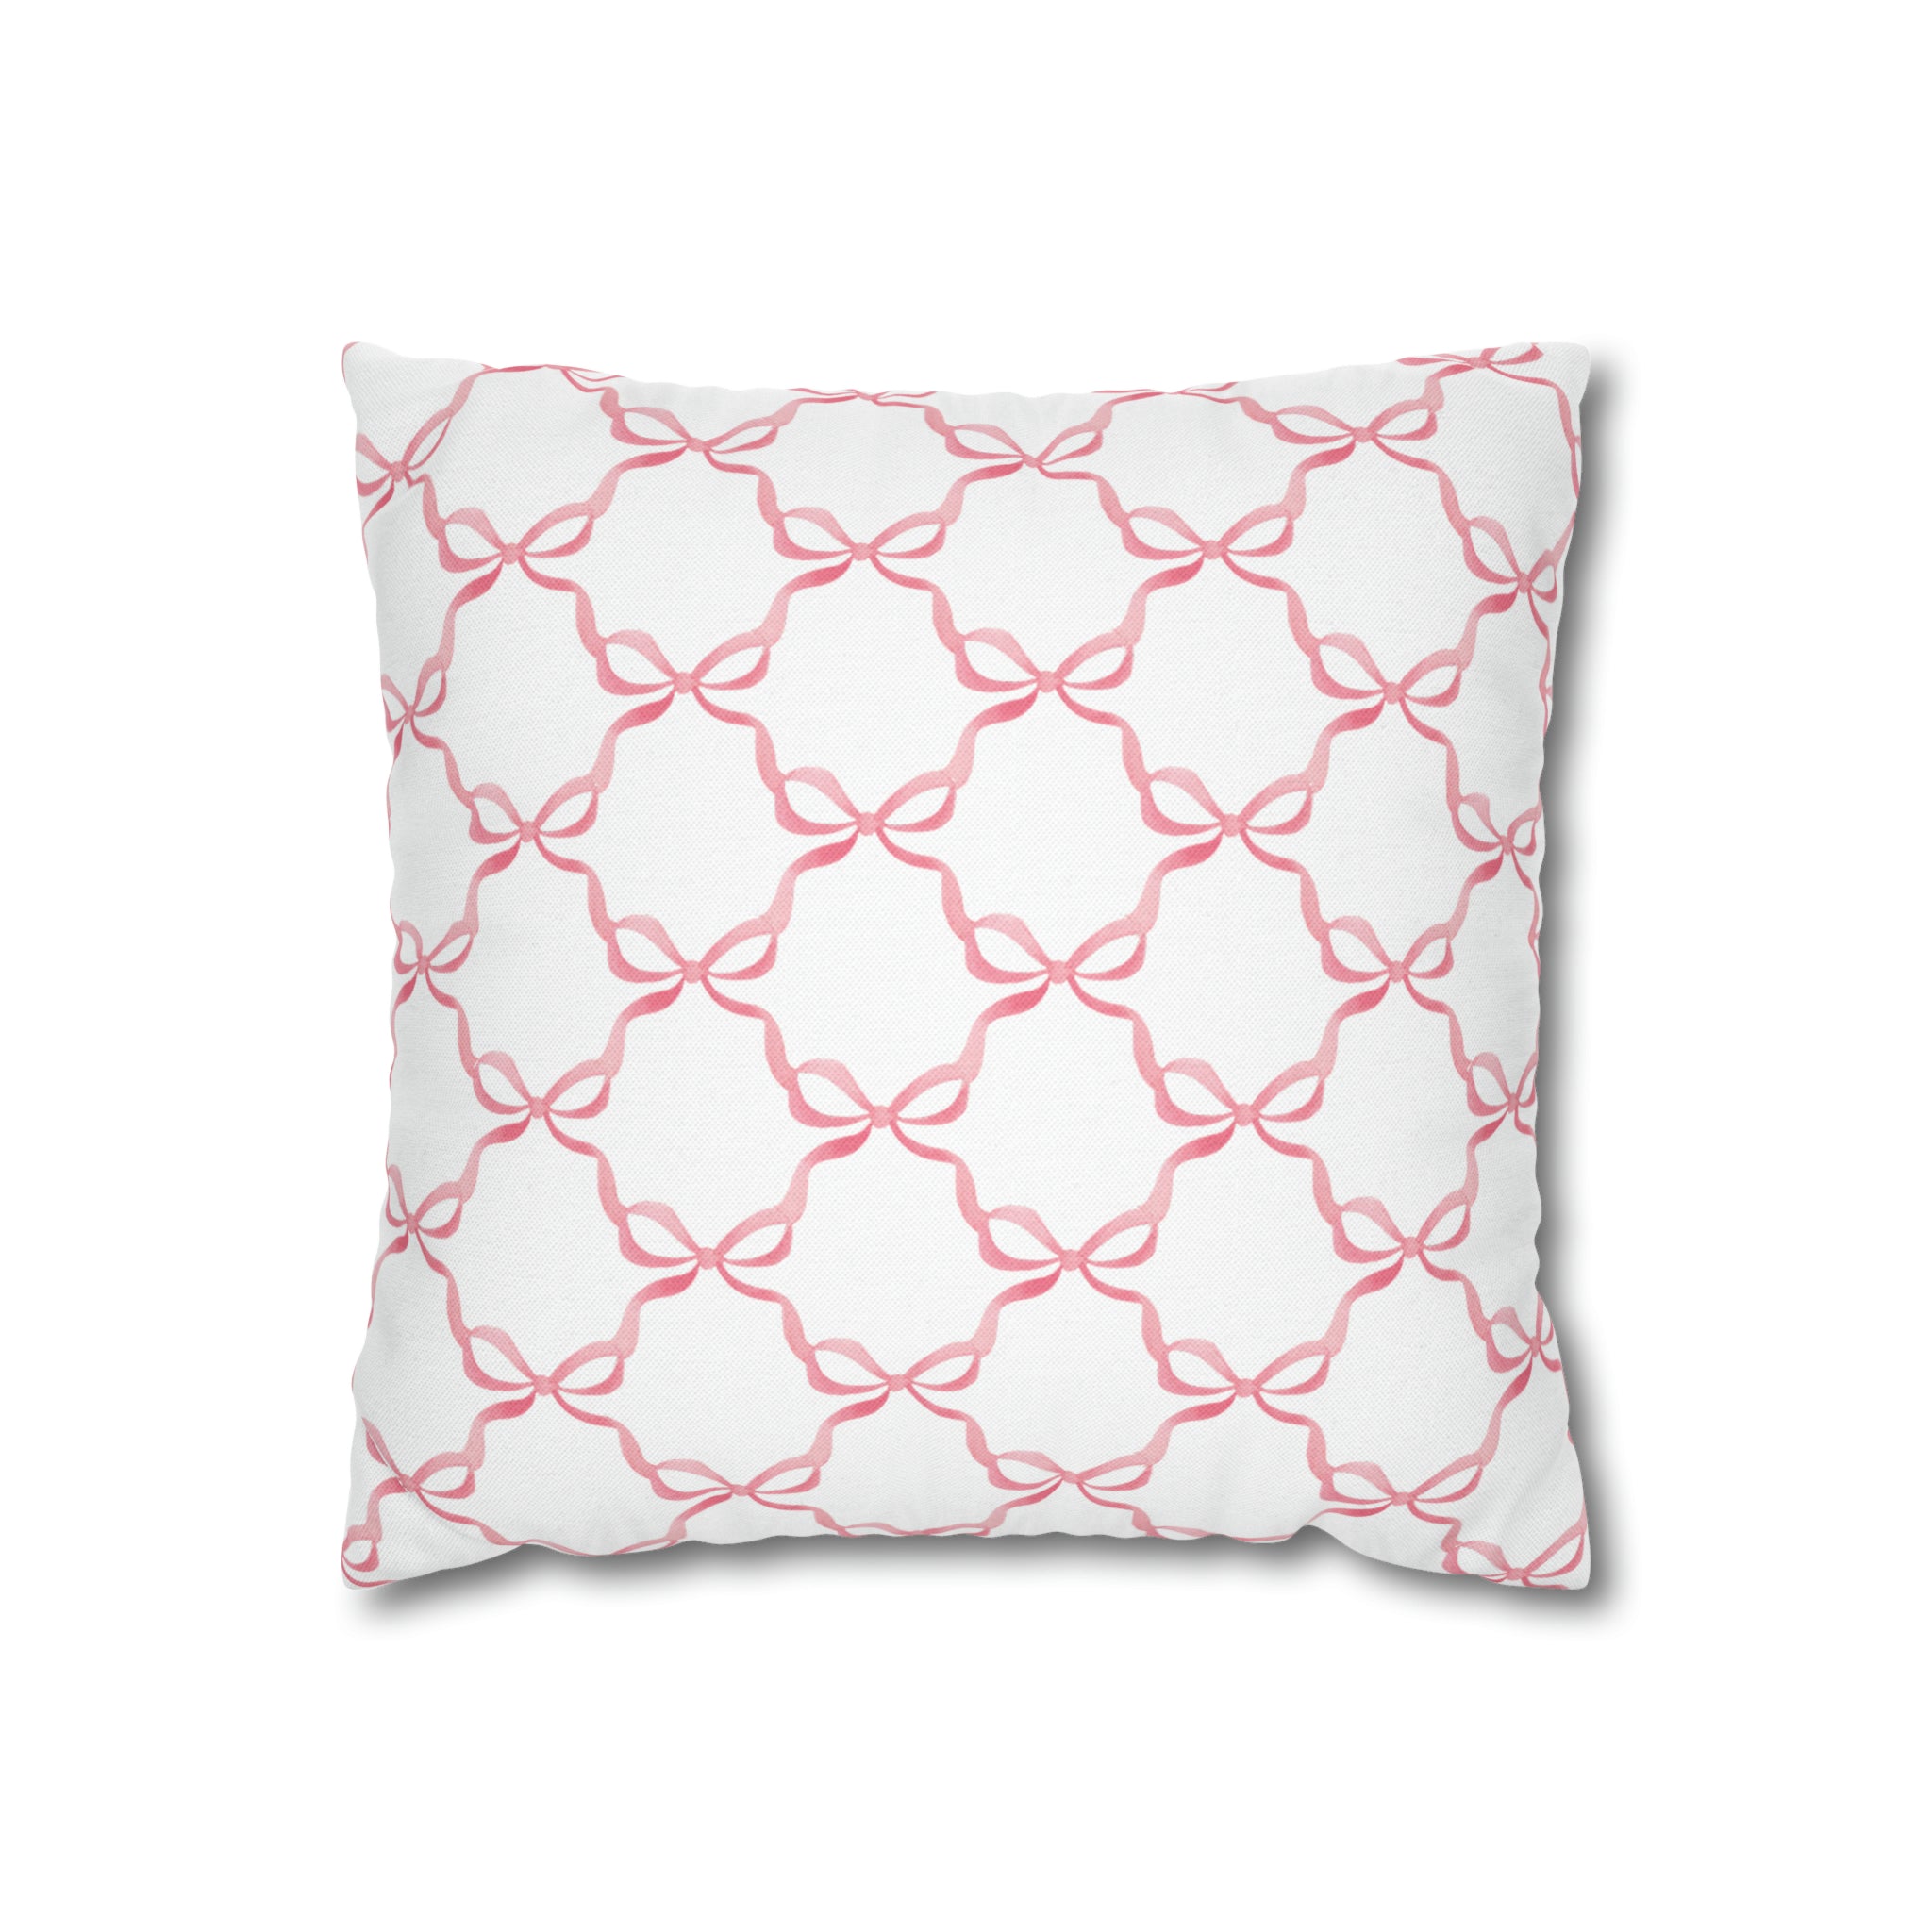 Watercolor Hearts Pink Pillow Cover with Zip Closure - Cover Only - Insert not included - teen, tween, dorm room